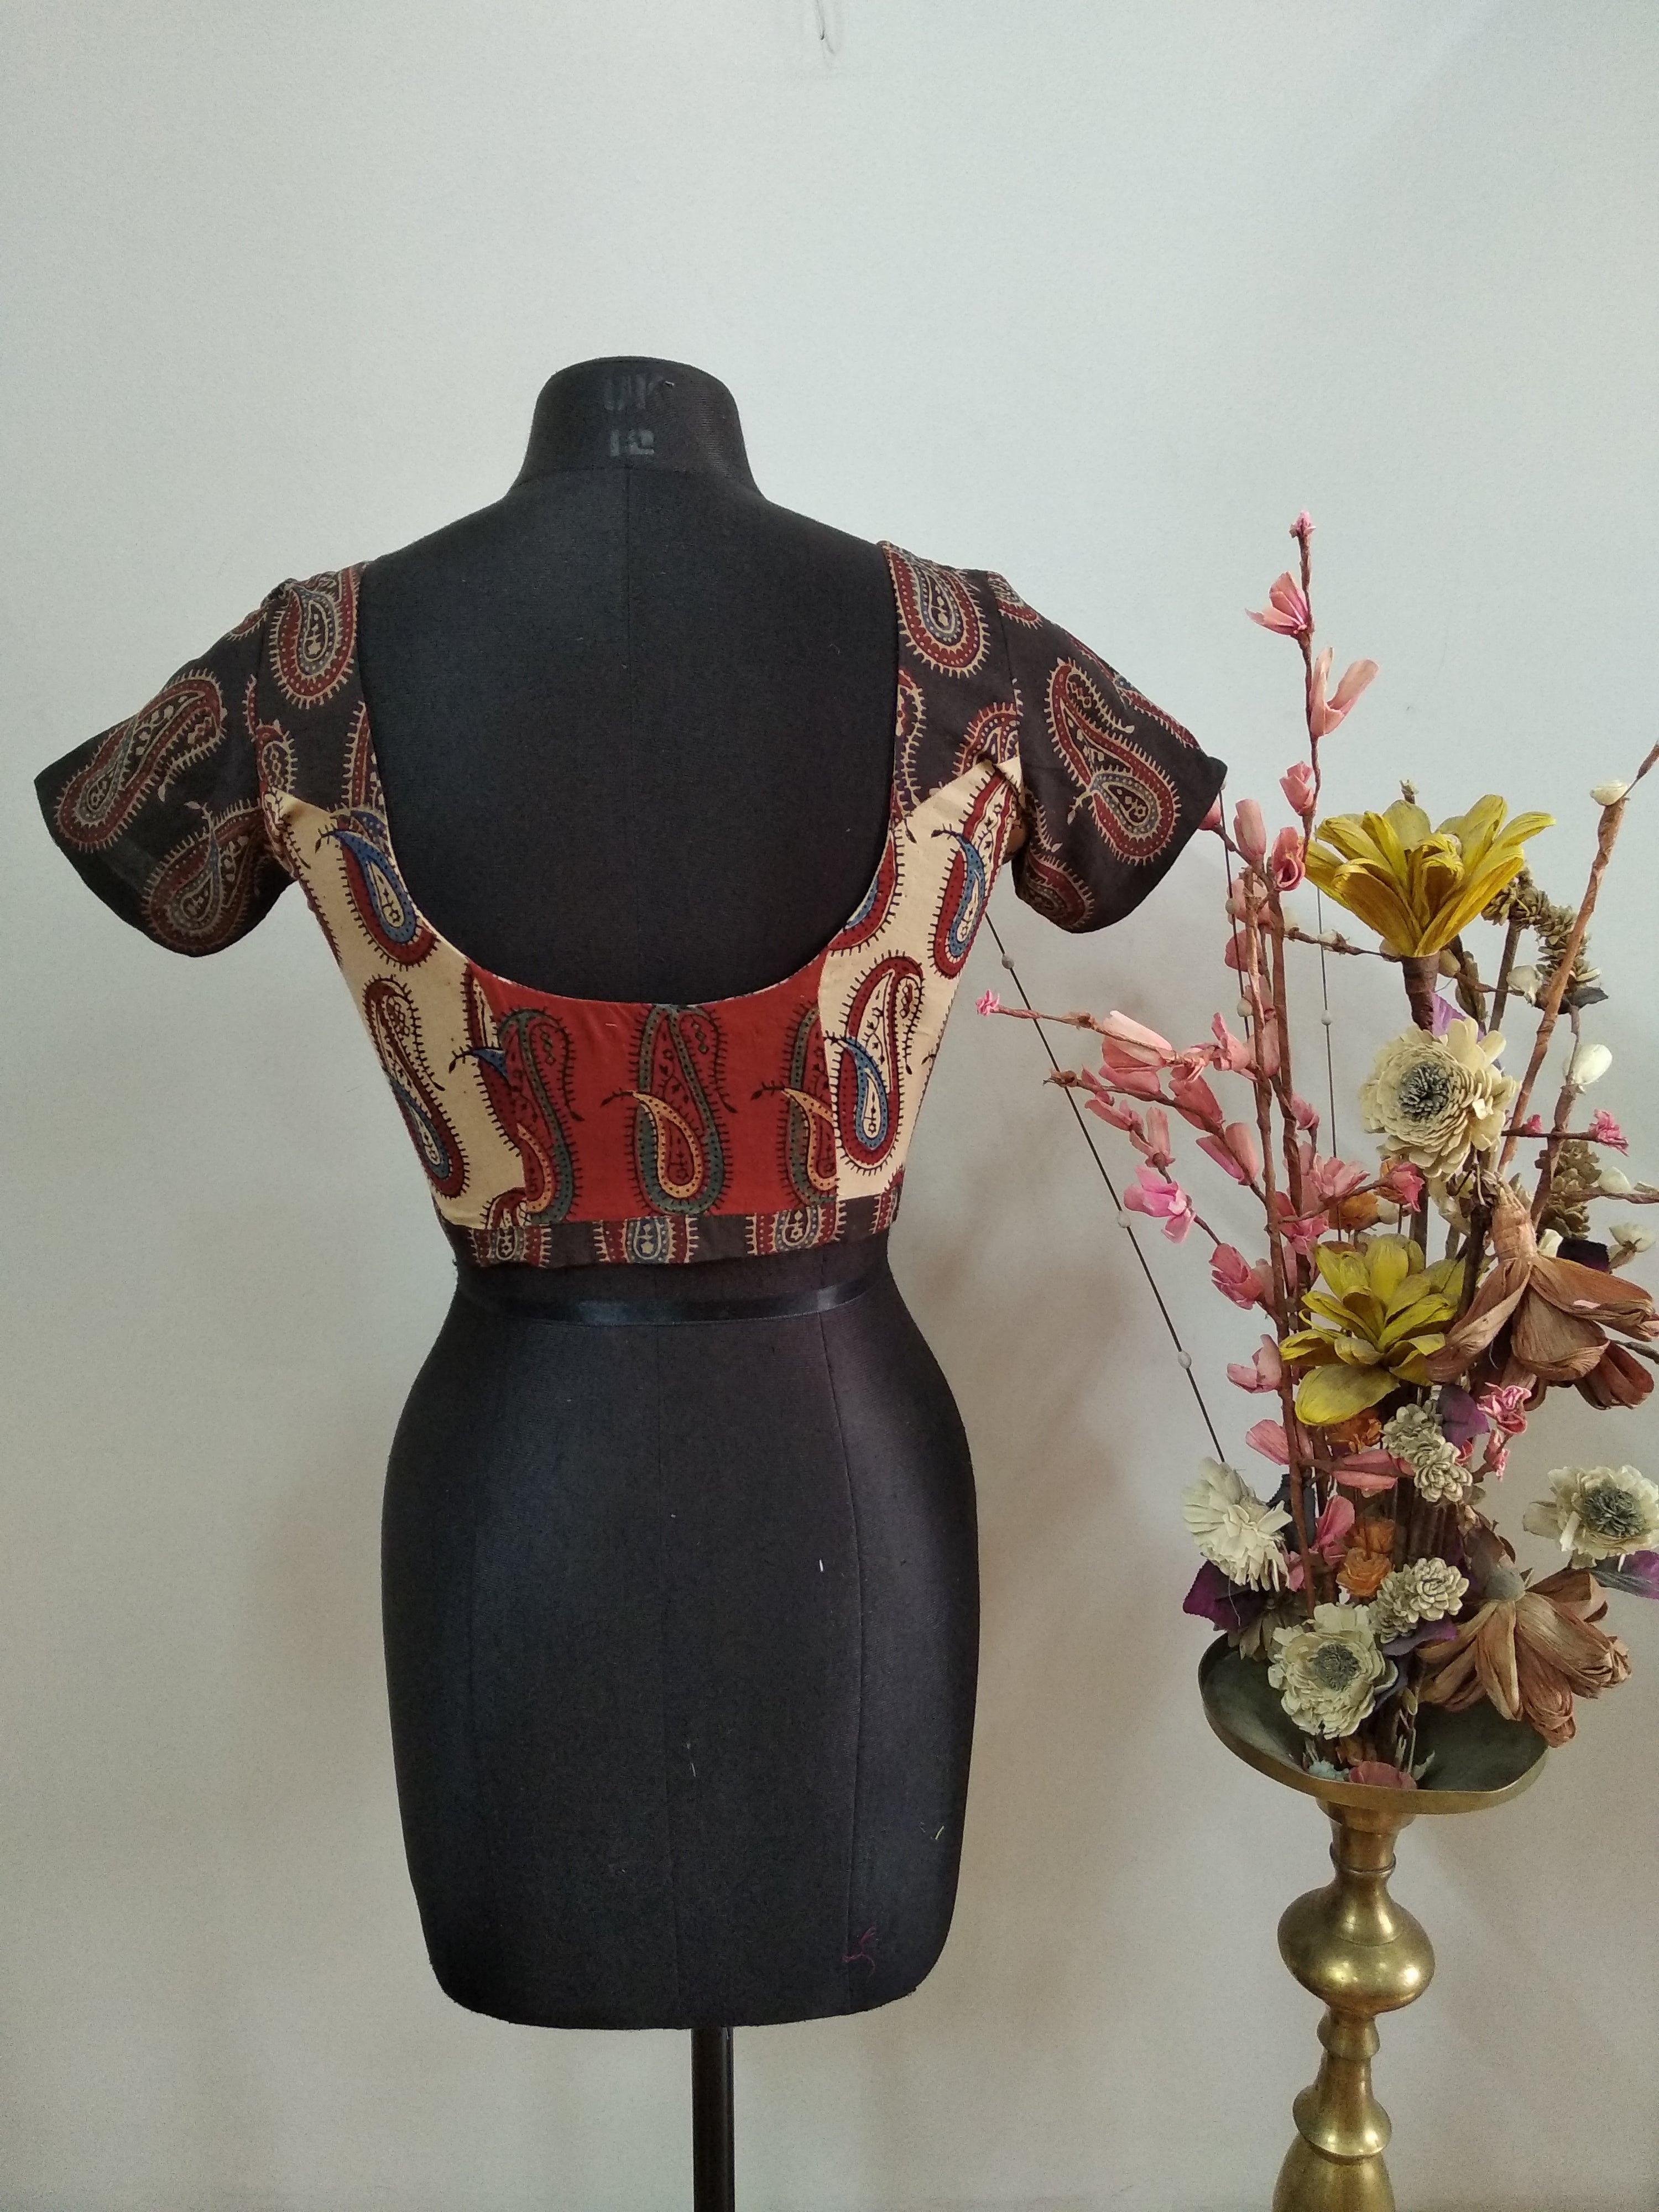 Cycle blouse with backless design by umbara designs